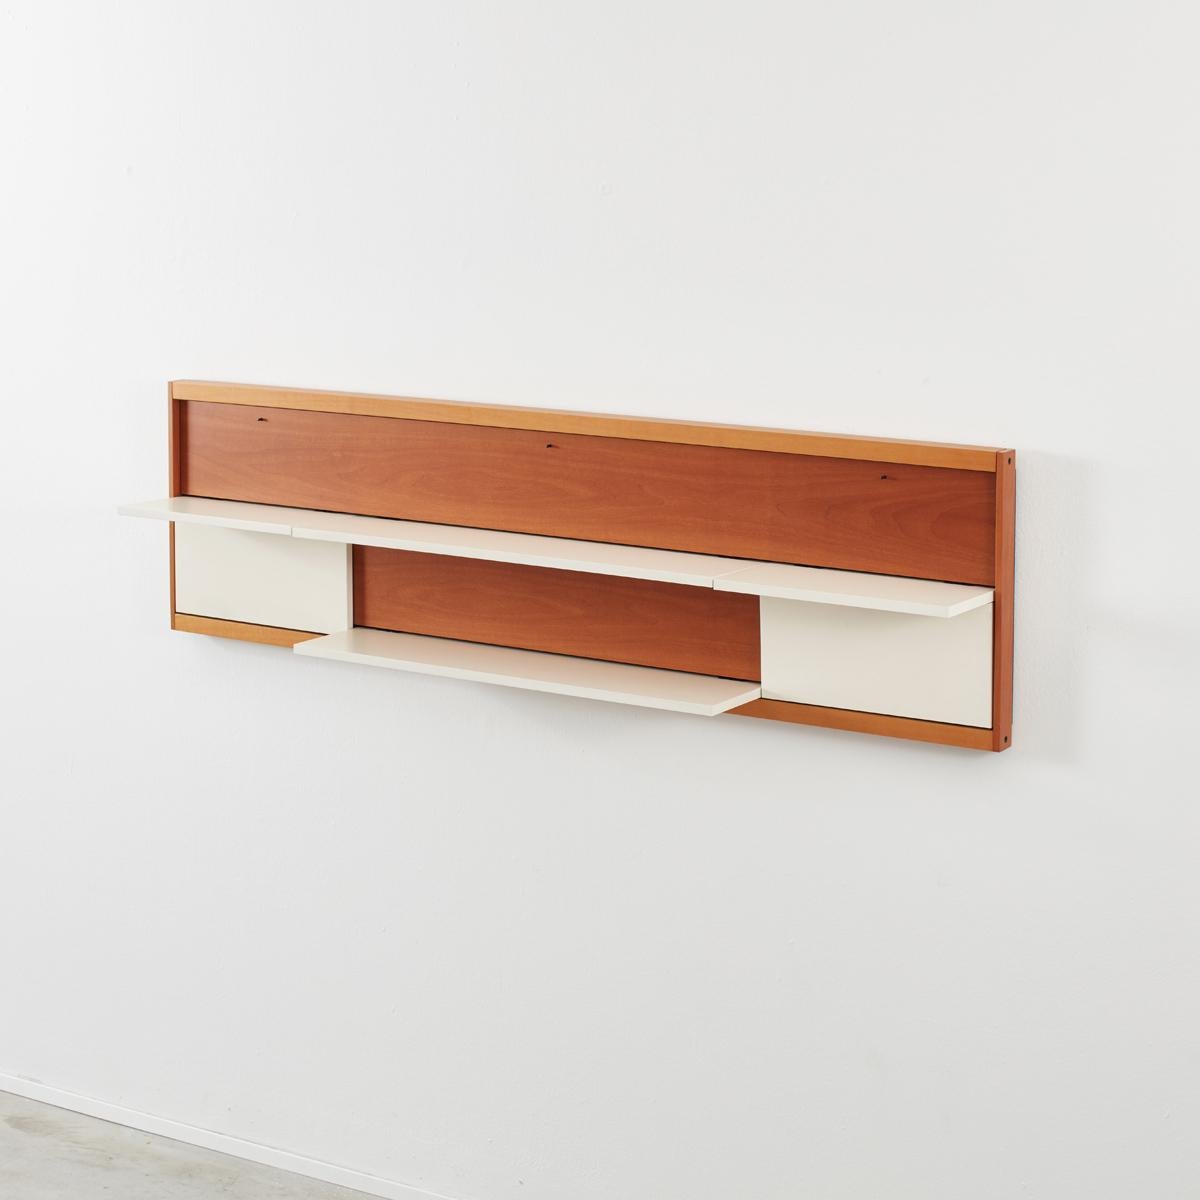 Wood Luca Meda Shelving Unit, Molteni, Italy, c1970 For Sale